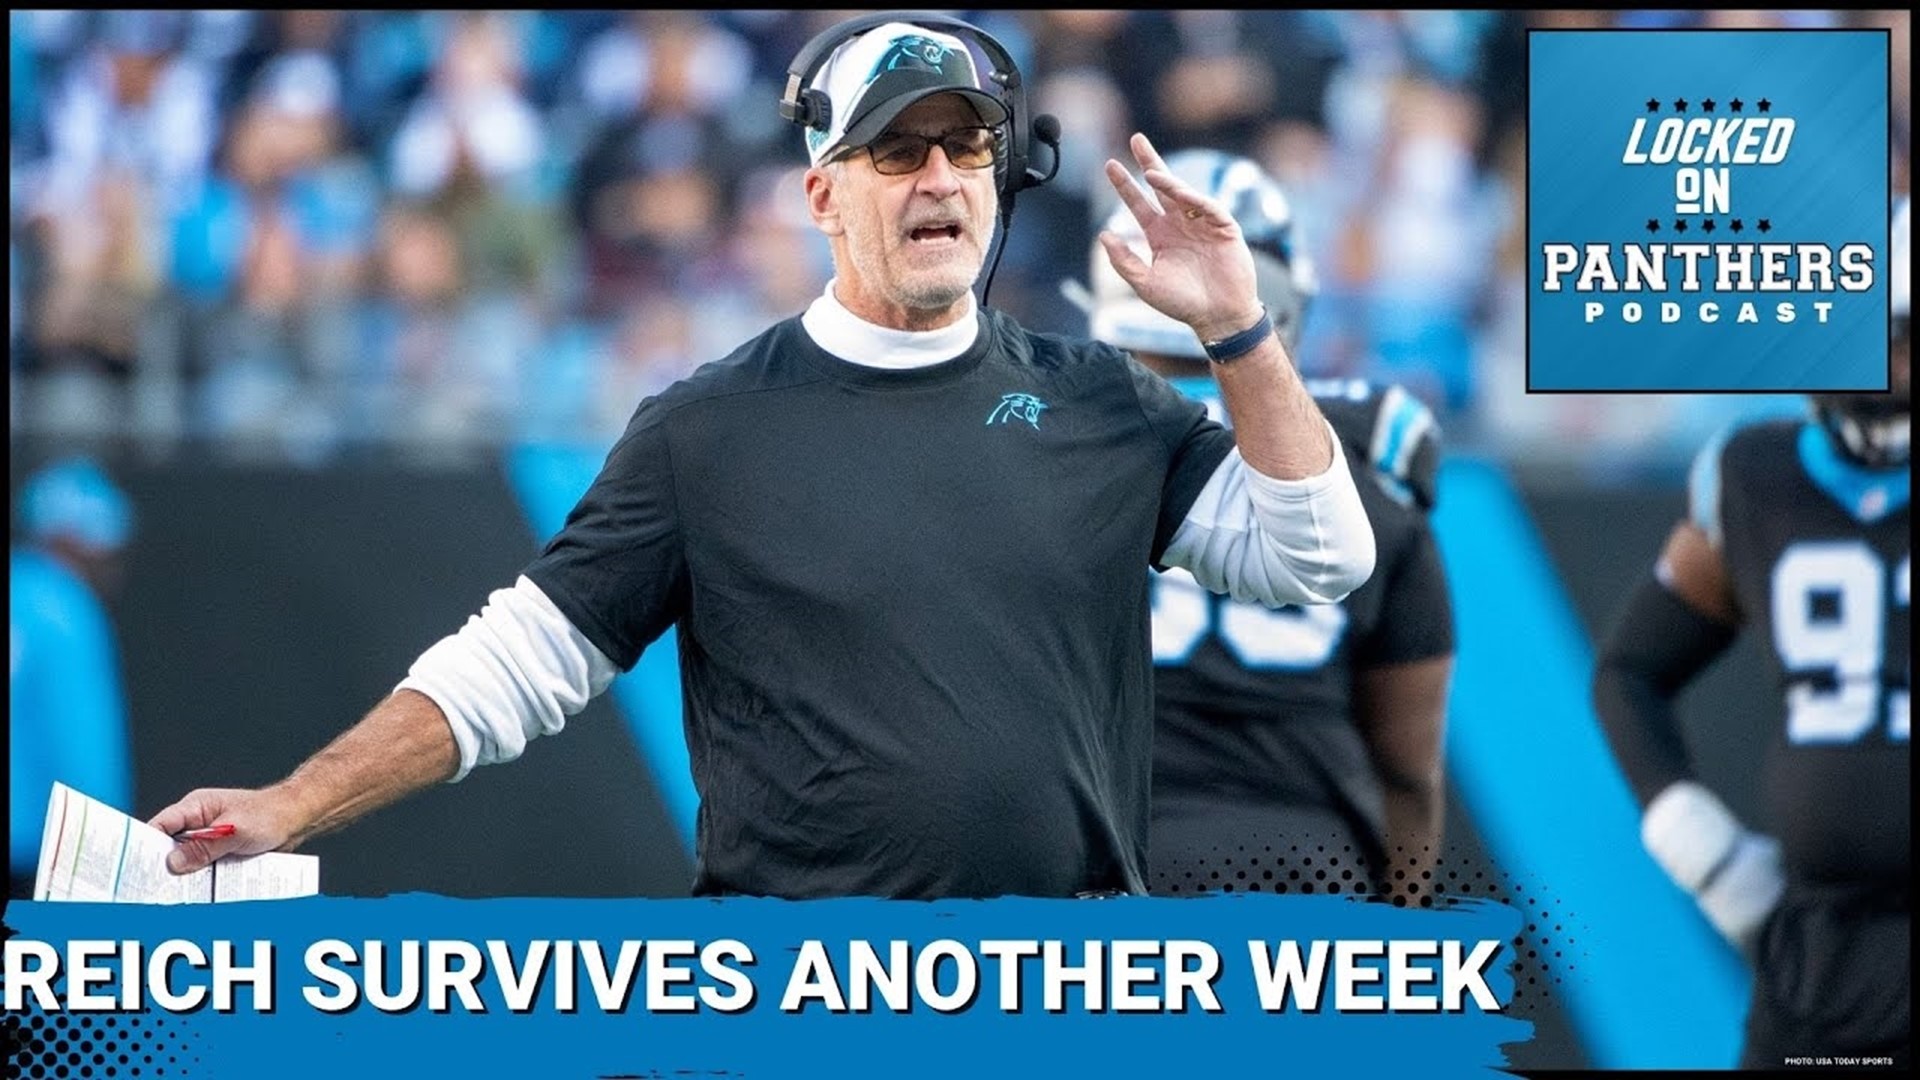 Following a 33-10 home loss to the Dallas Cowboys, the Carolina Panthers sit at 1-9 as they prepare to head on the road for their next three games.